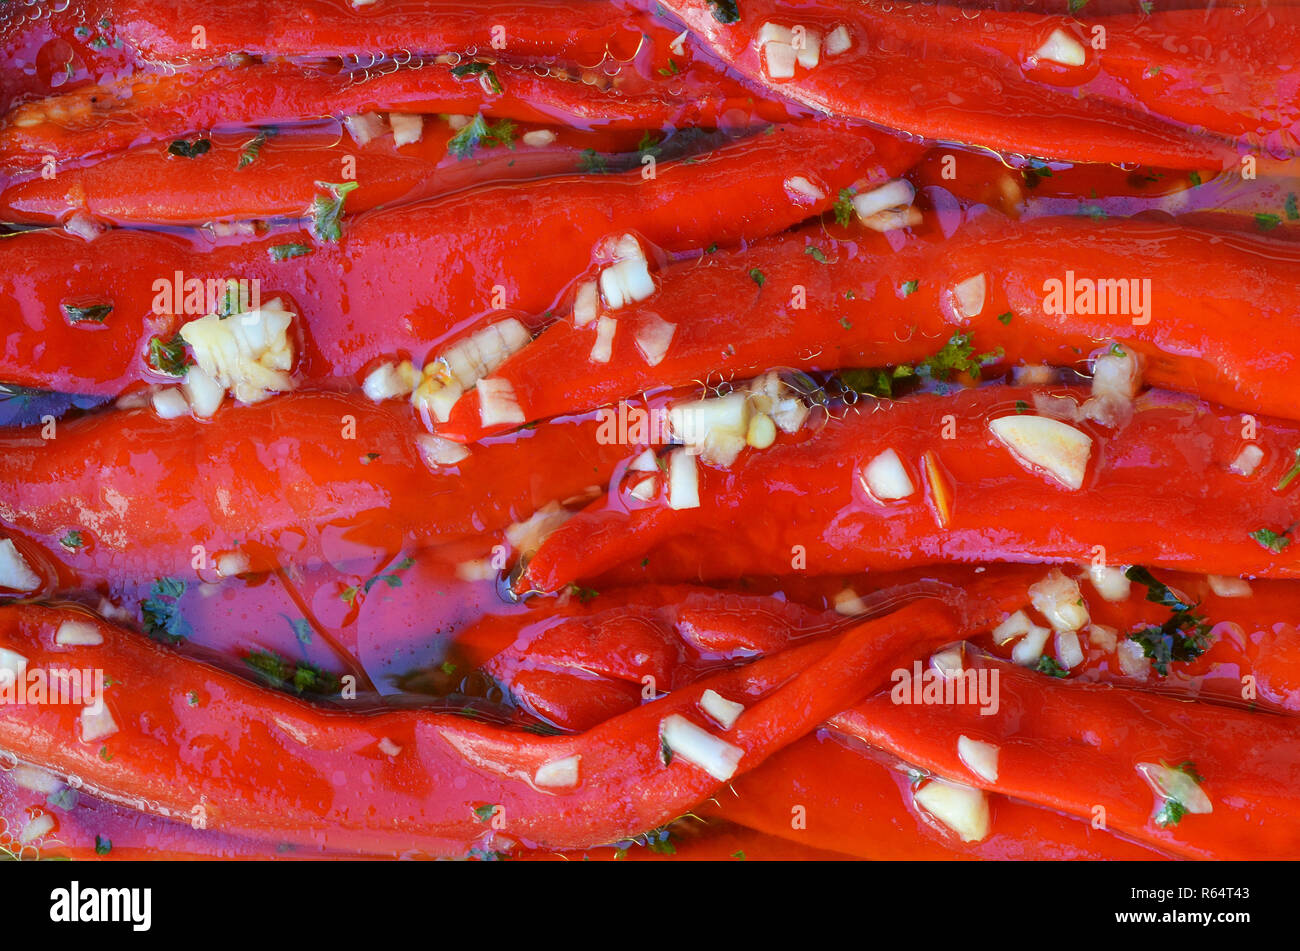 Salad of red peppers and garlic in a pickle Stock Photo